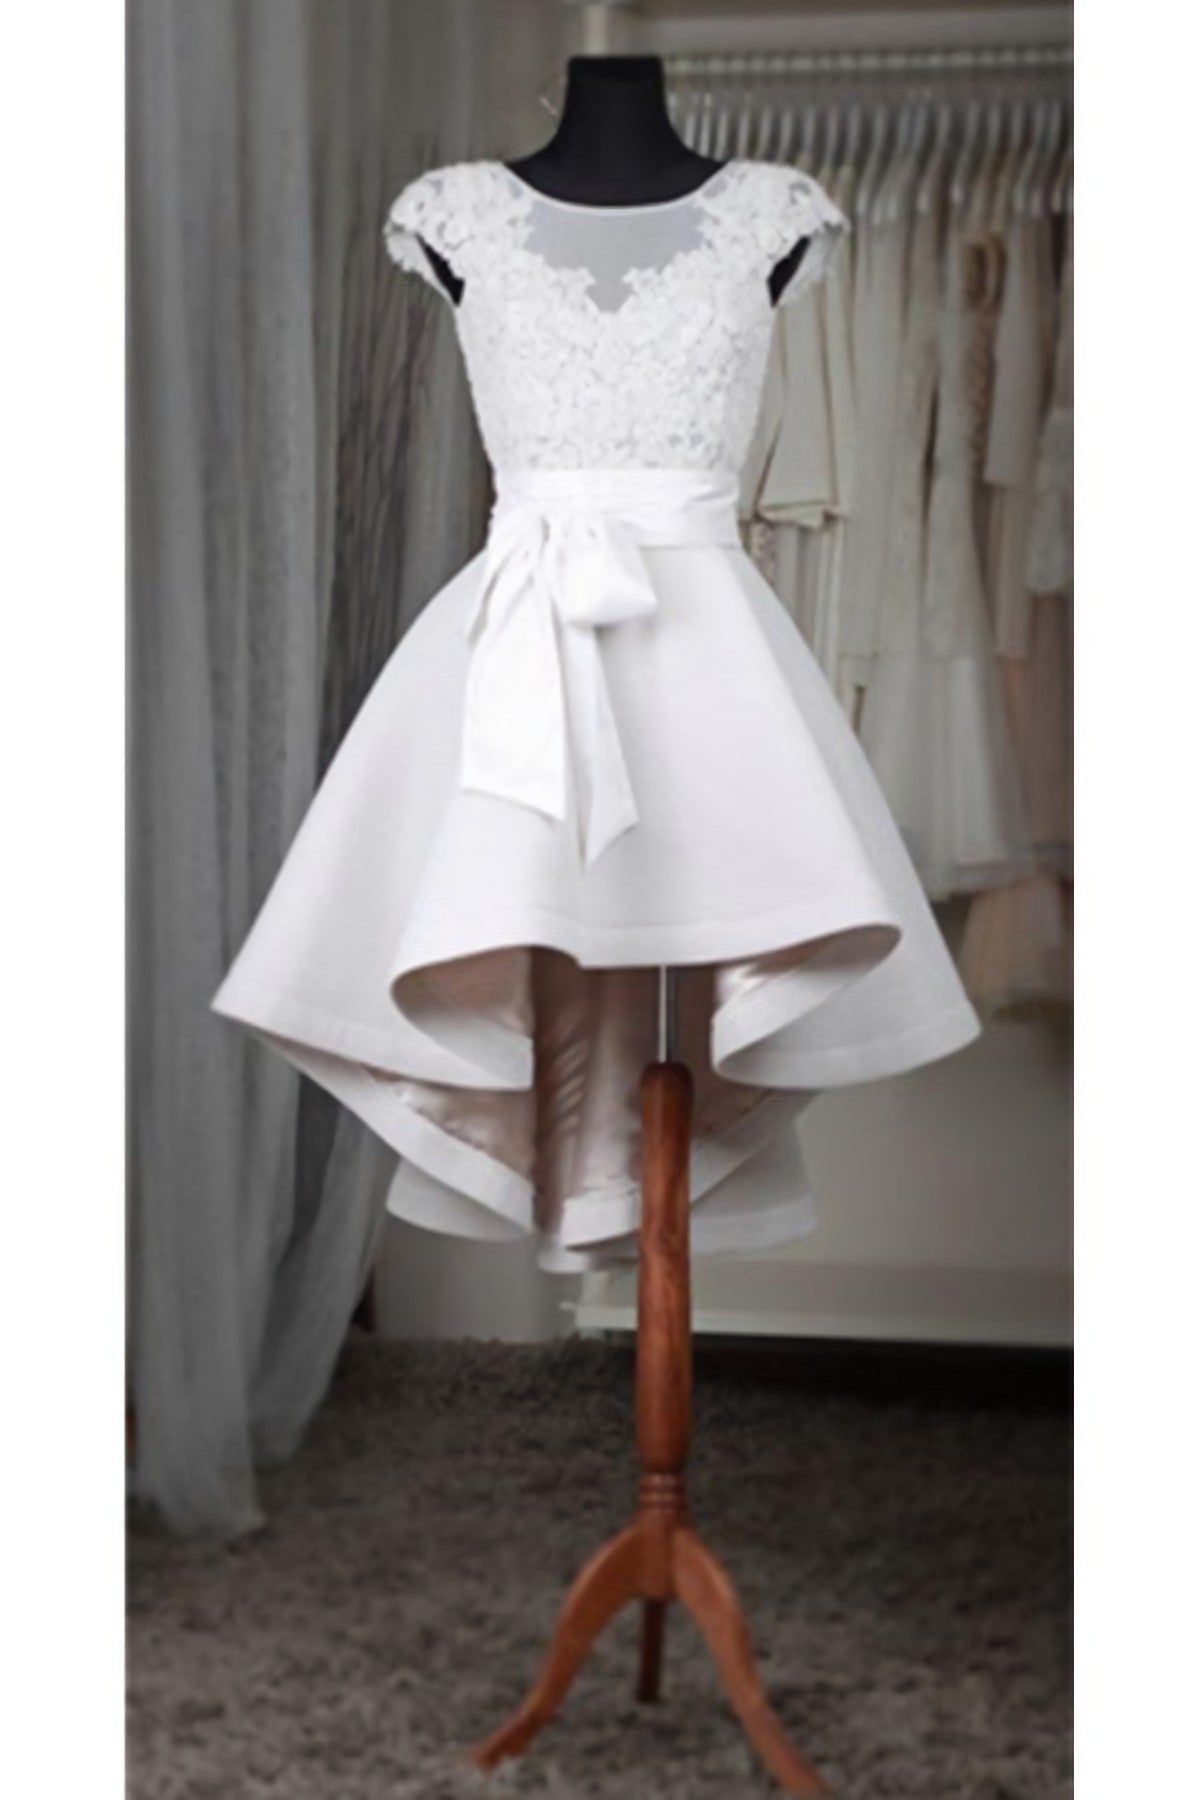 White Lace Short For Teens Classy Short Sleeves White Belt Corset Homecoming Dresses outfit, Prom Dressed 2040